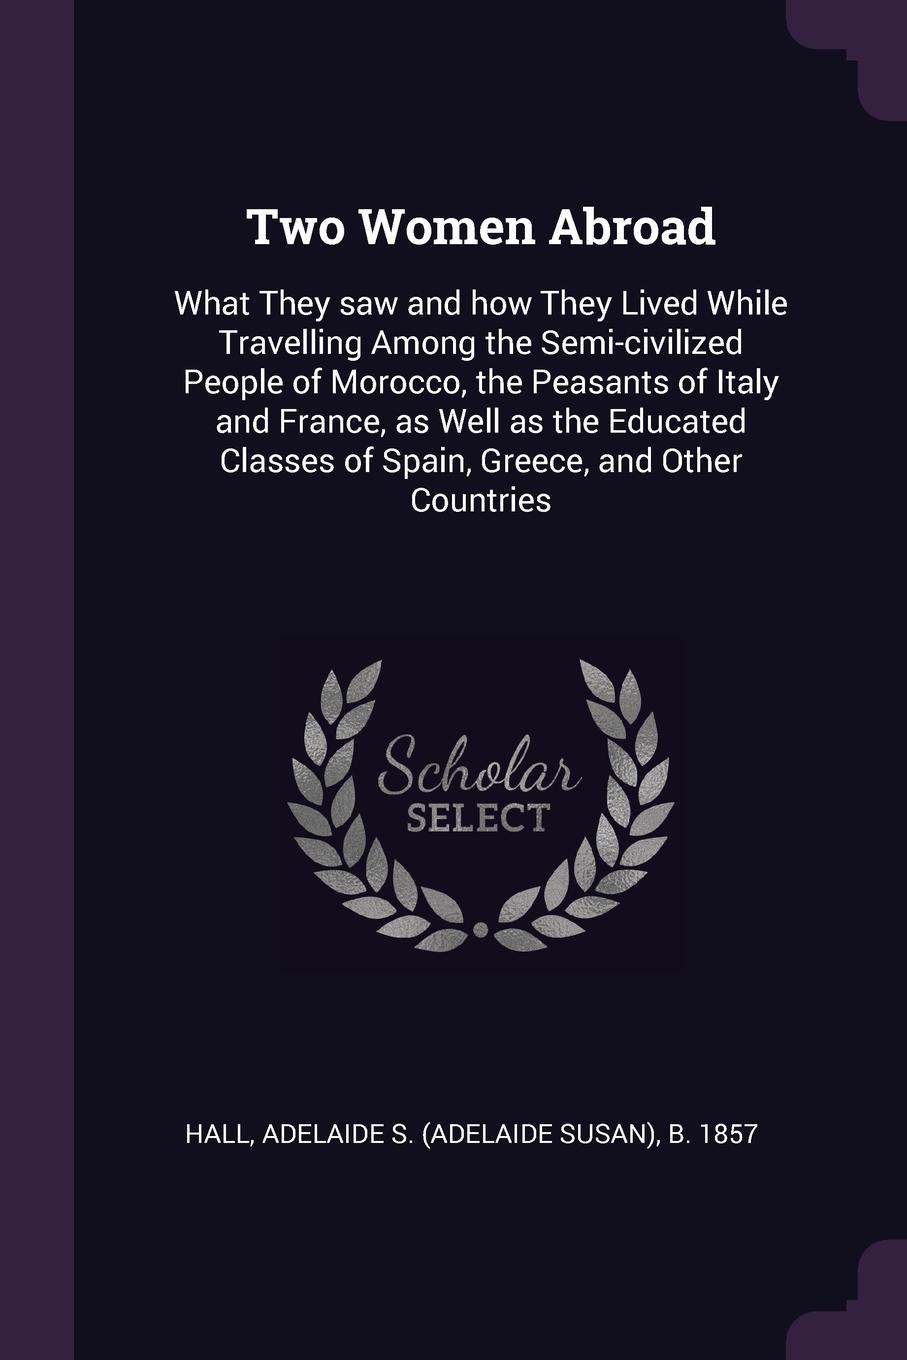 Two Women Abroad. What They saw and how They Lived While Travelling Among the Semi-civilized People of Morocco, the Peasants of Italy and France, as Well as the Educated Classes of Spain, Greece, and Other Countries